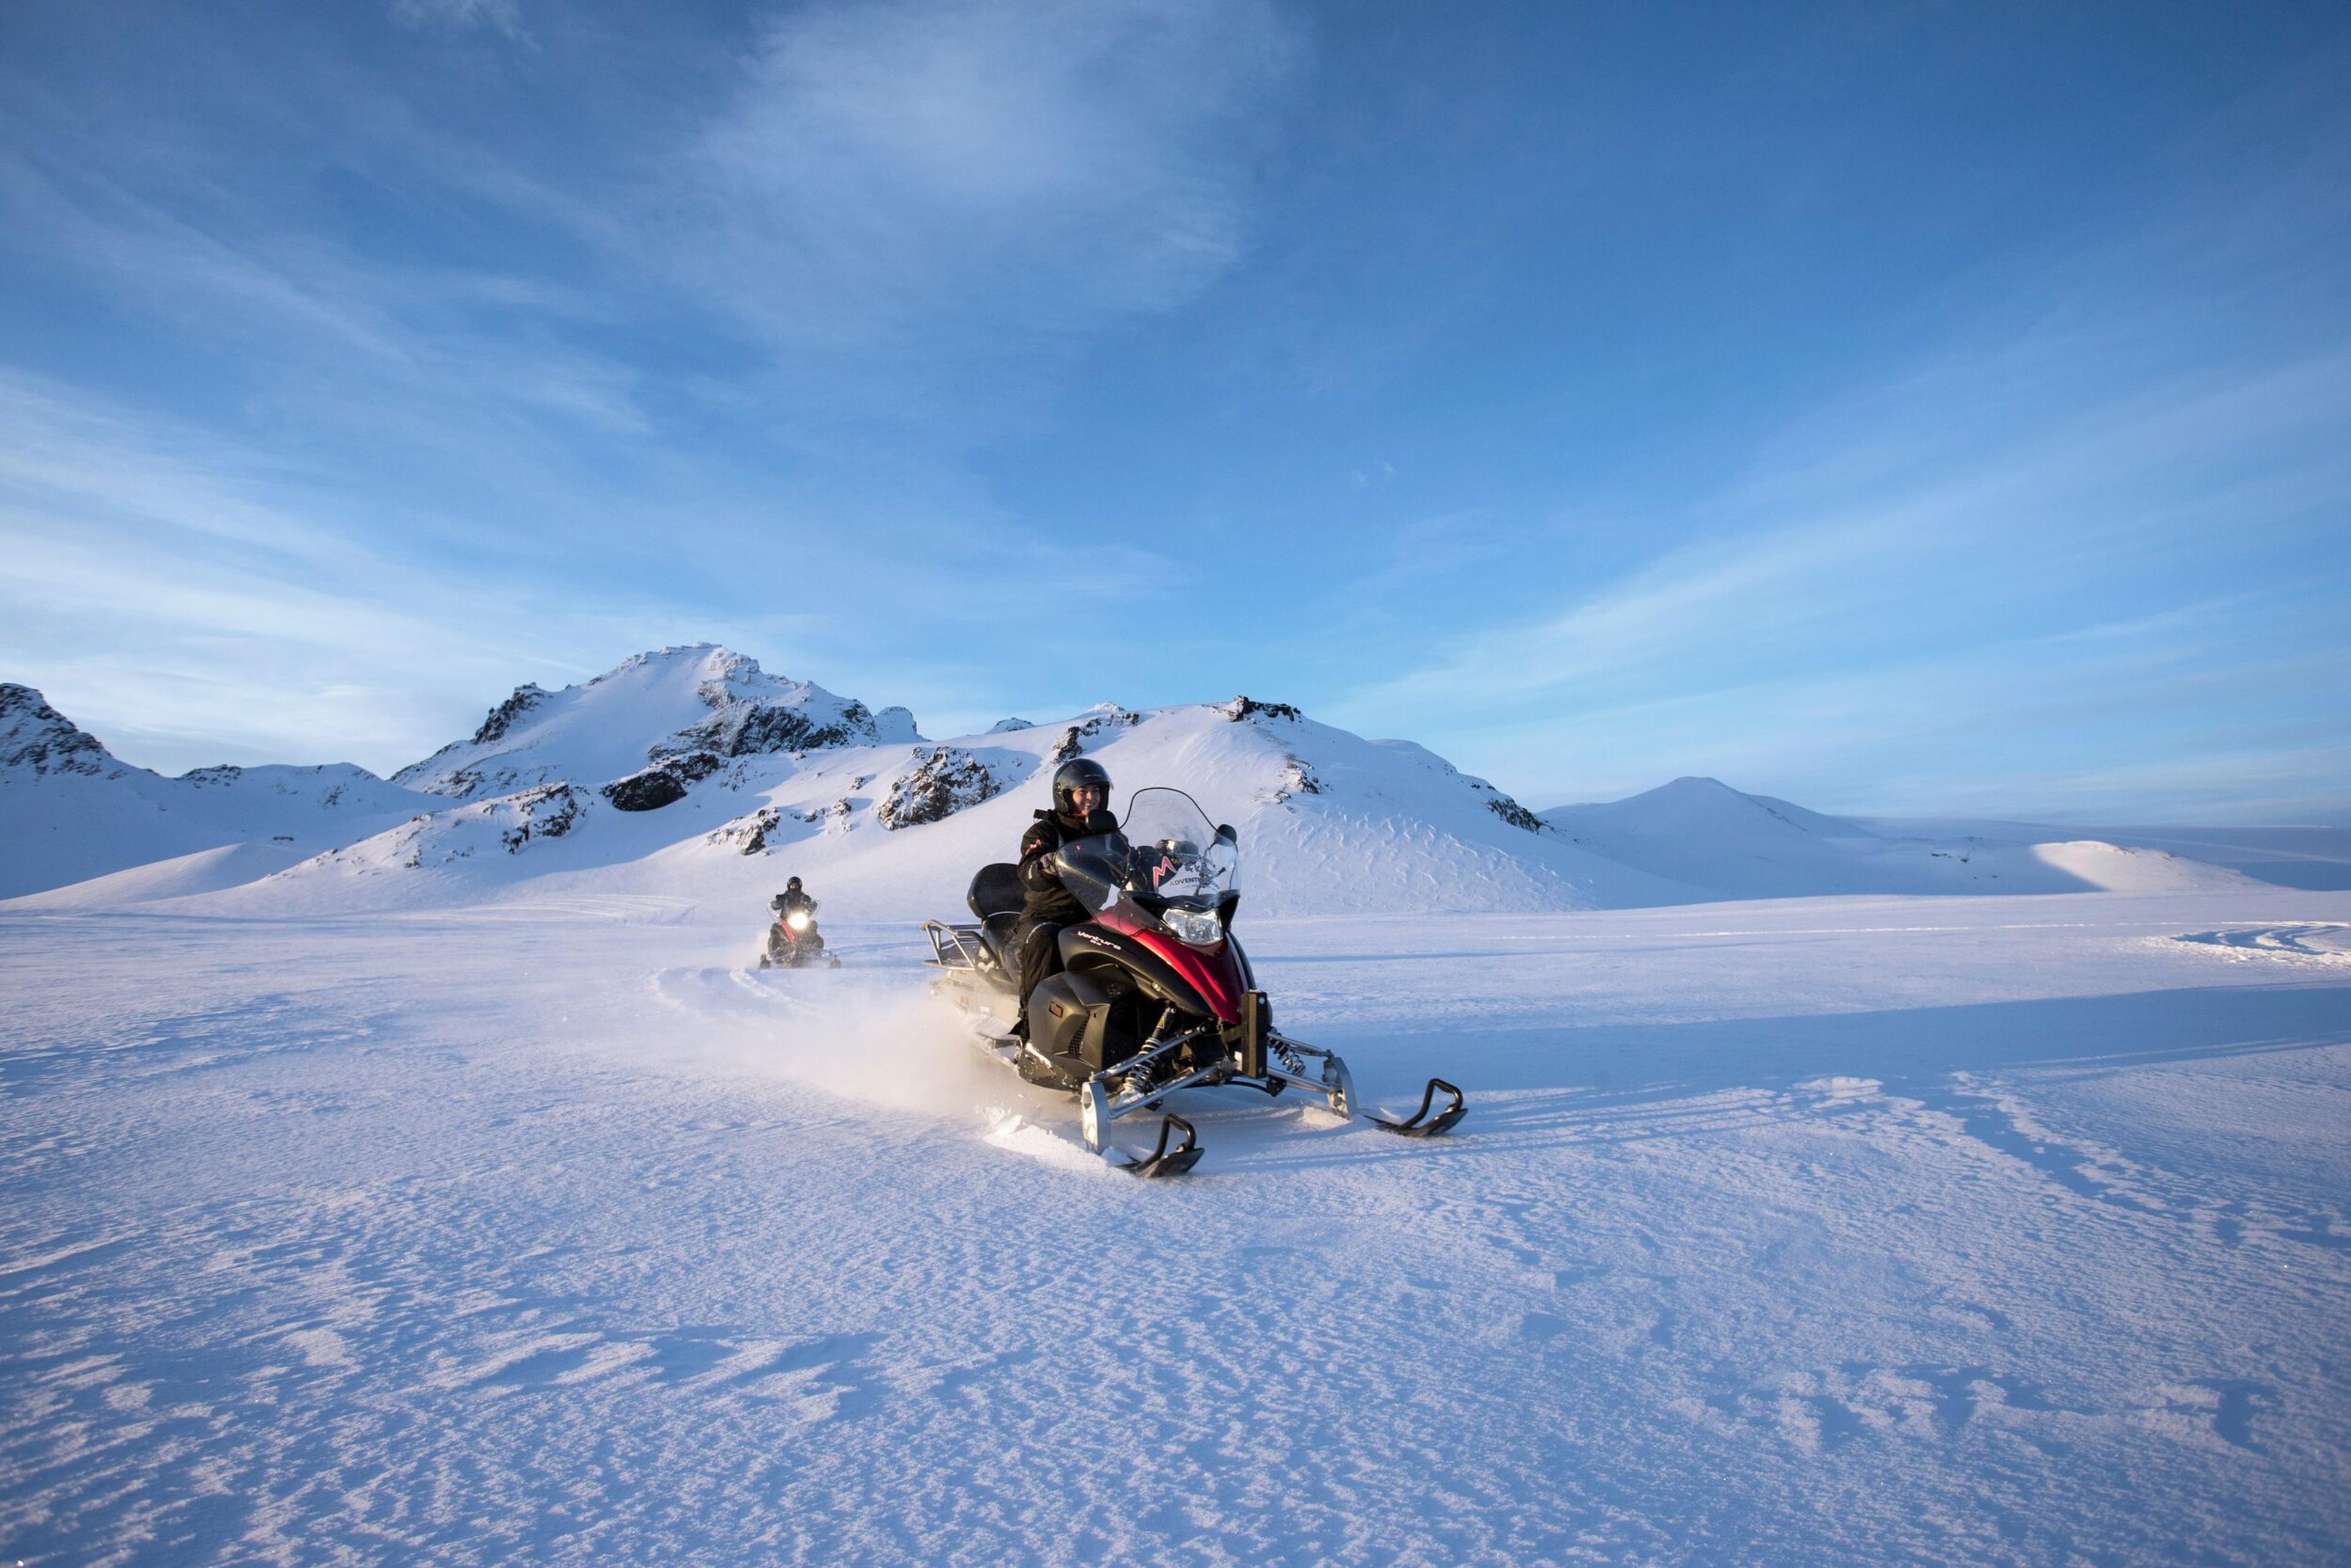 Snowmobilers enjoying a sunny day on a snowy mountain.